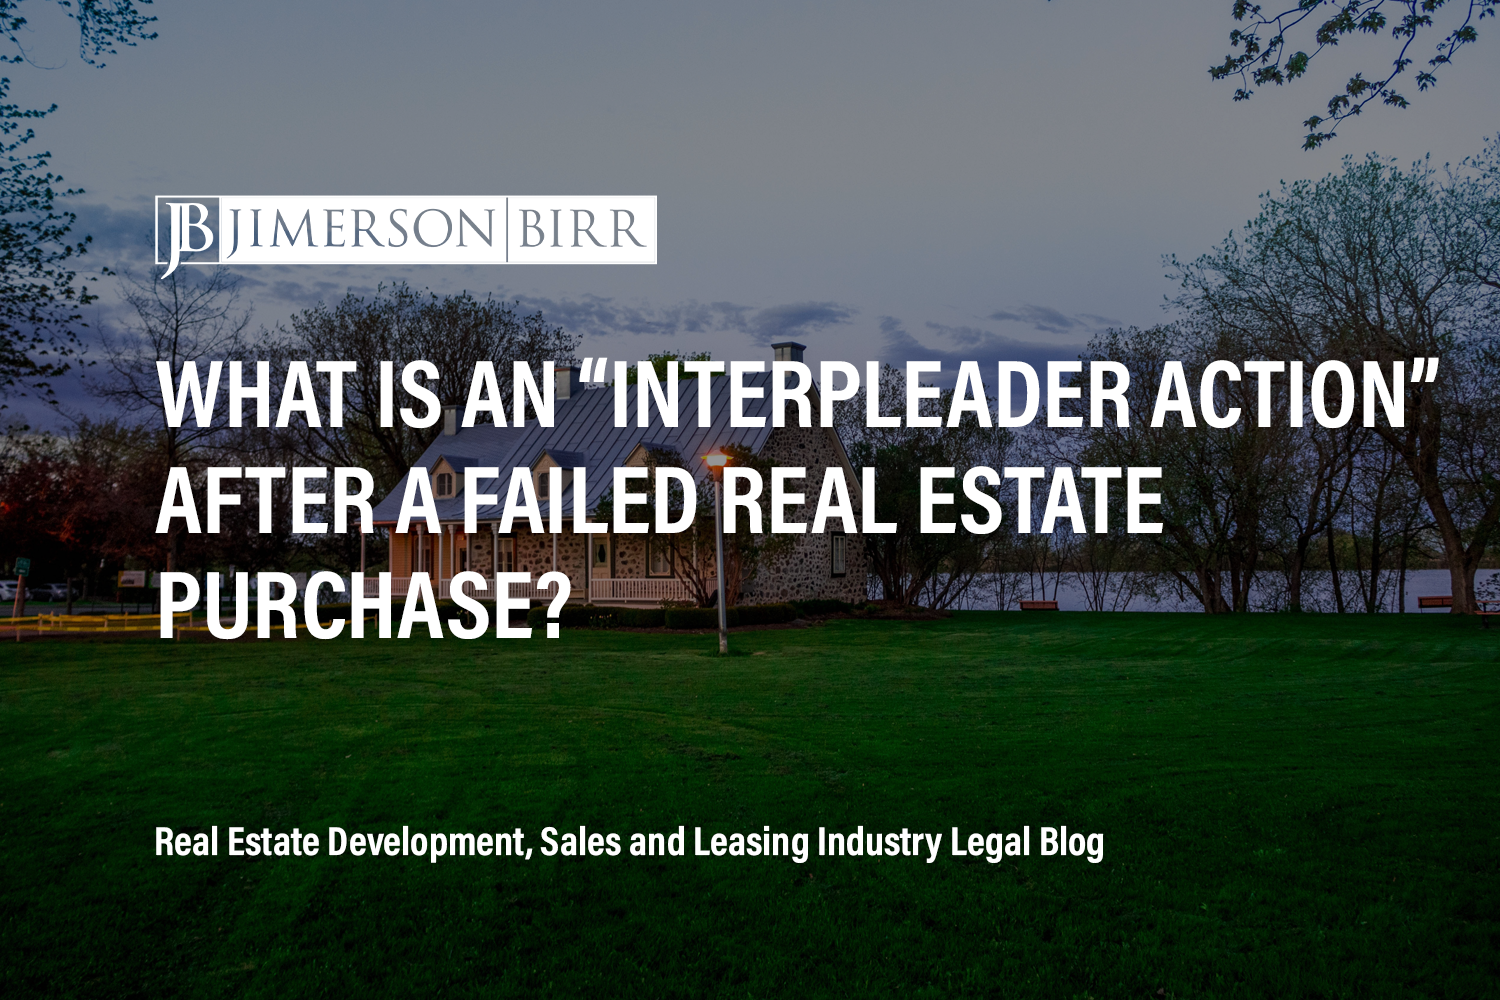 What is an “interpleader action” after a failed real estate purchase?